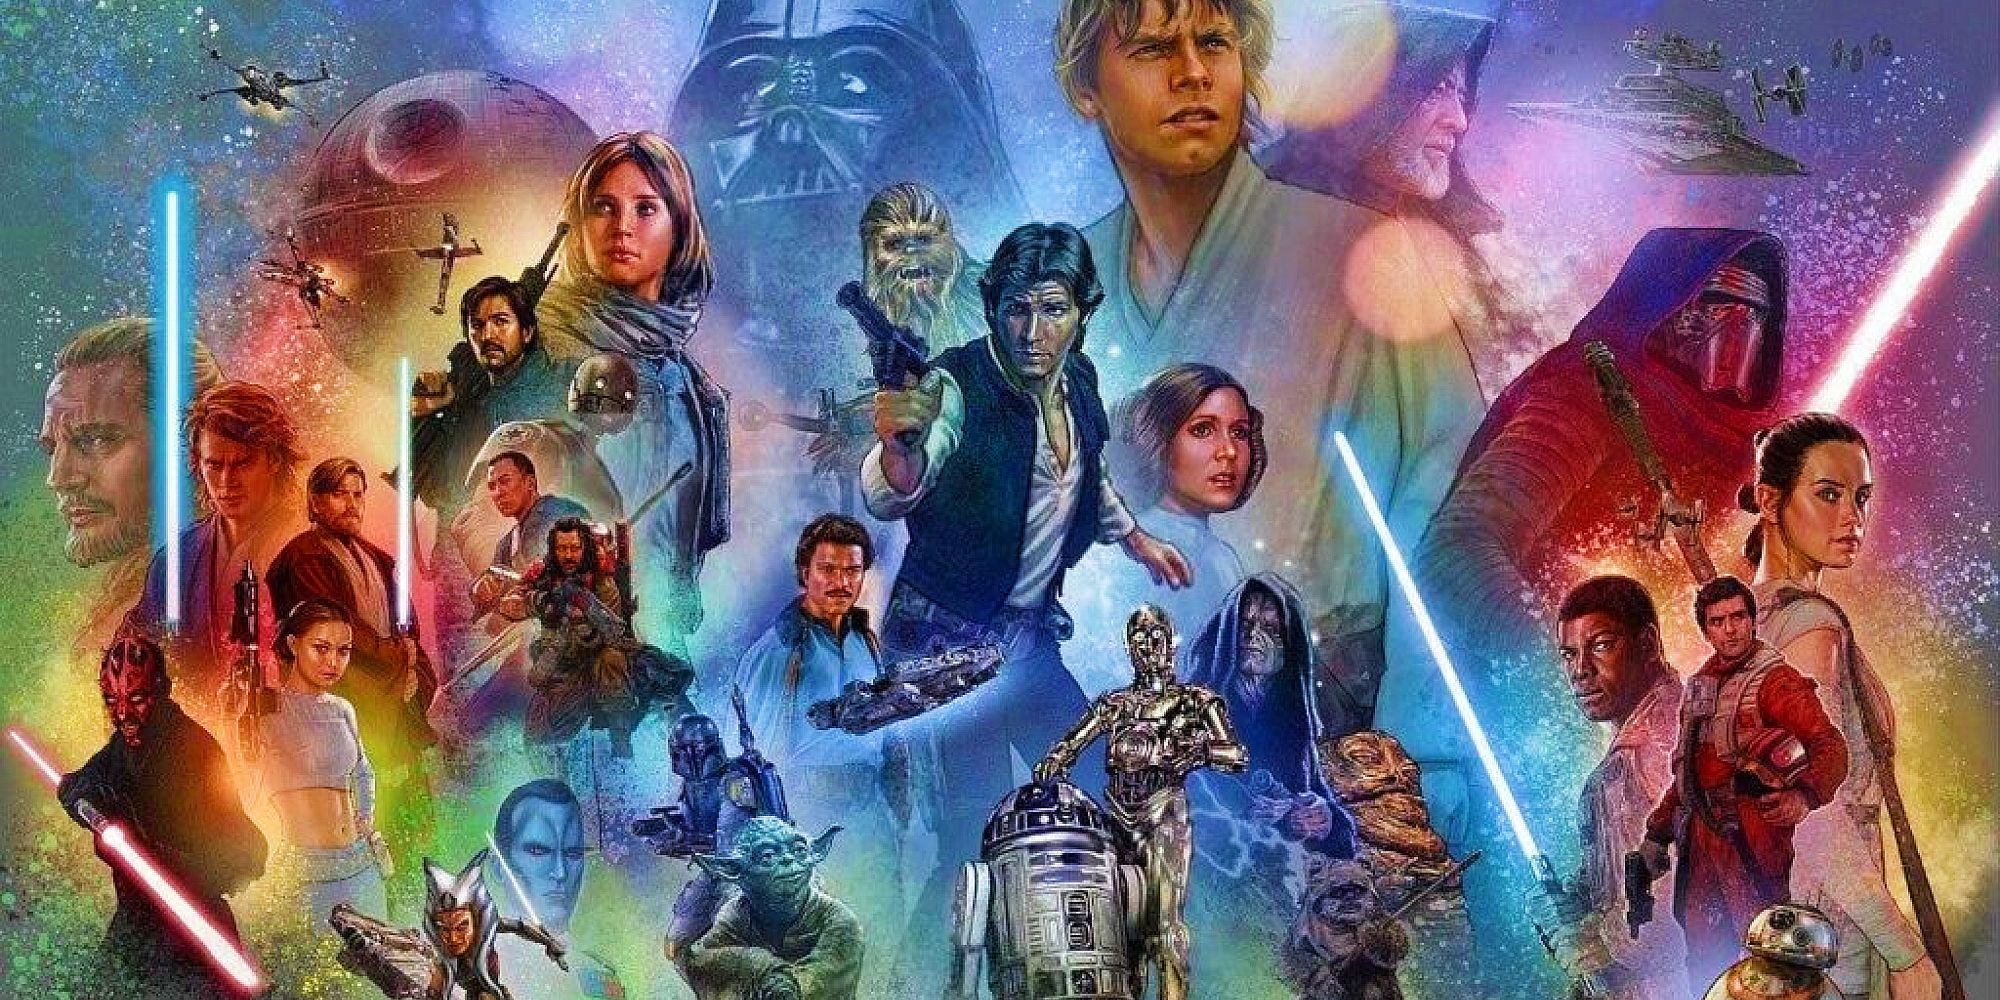 A mural of the Skywalker Saga depicting the main characters of the prequel, original, and sequel Star Wars trilogies